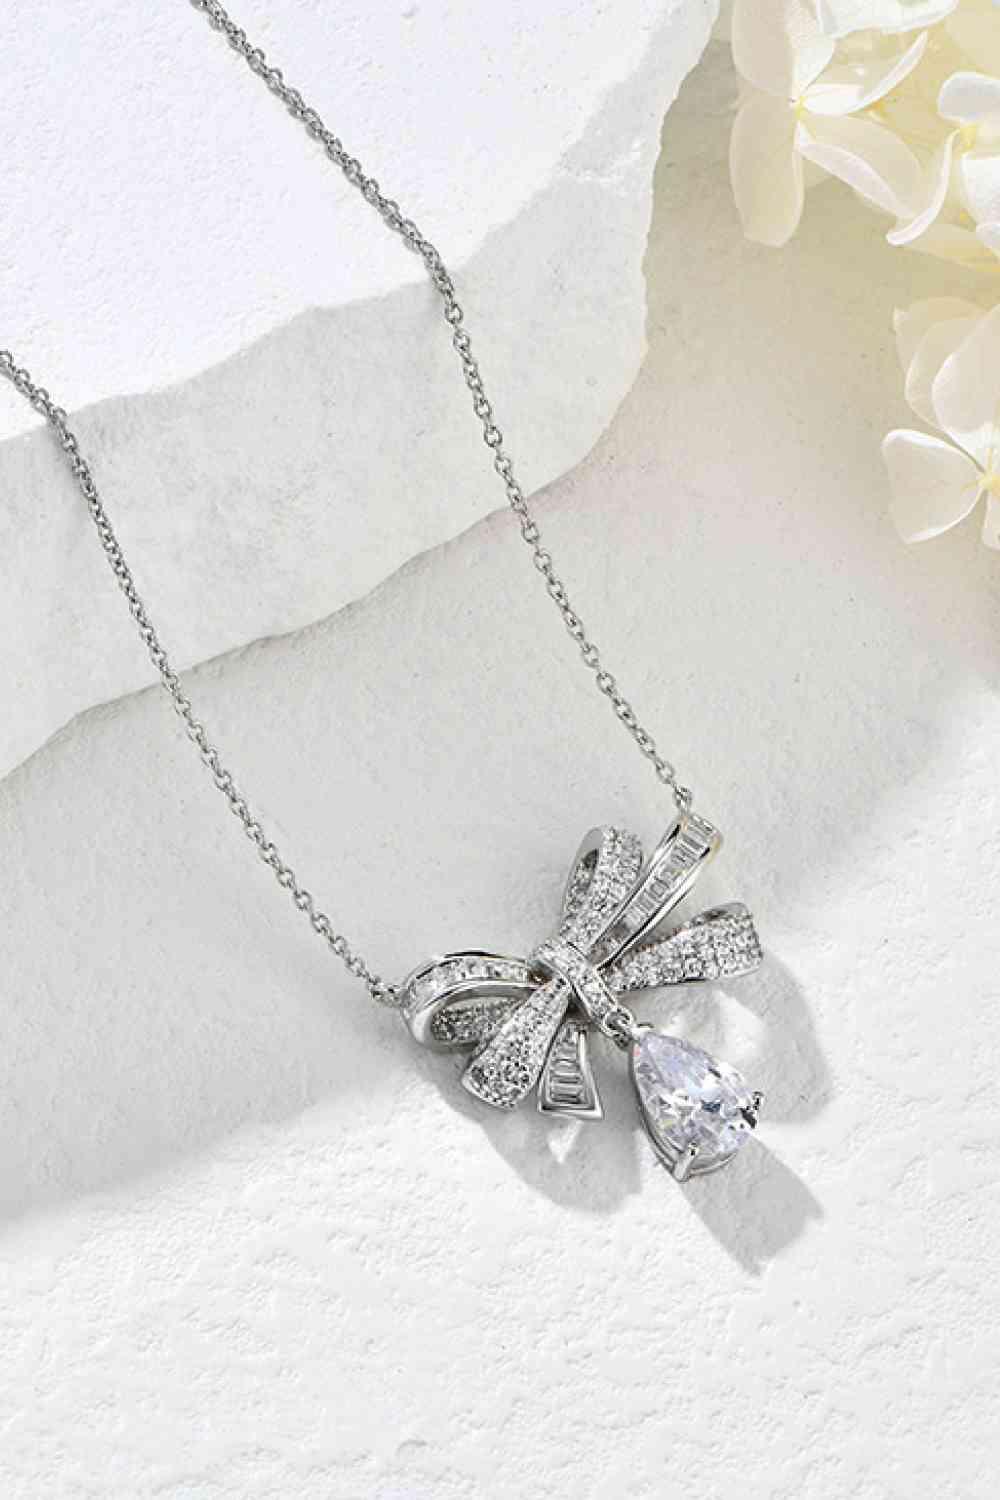 a necklace with a bow on it next to a flower